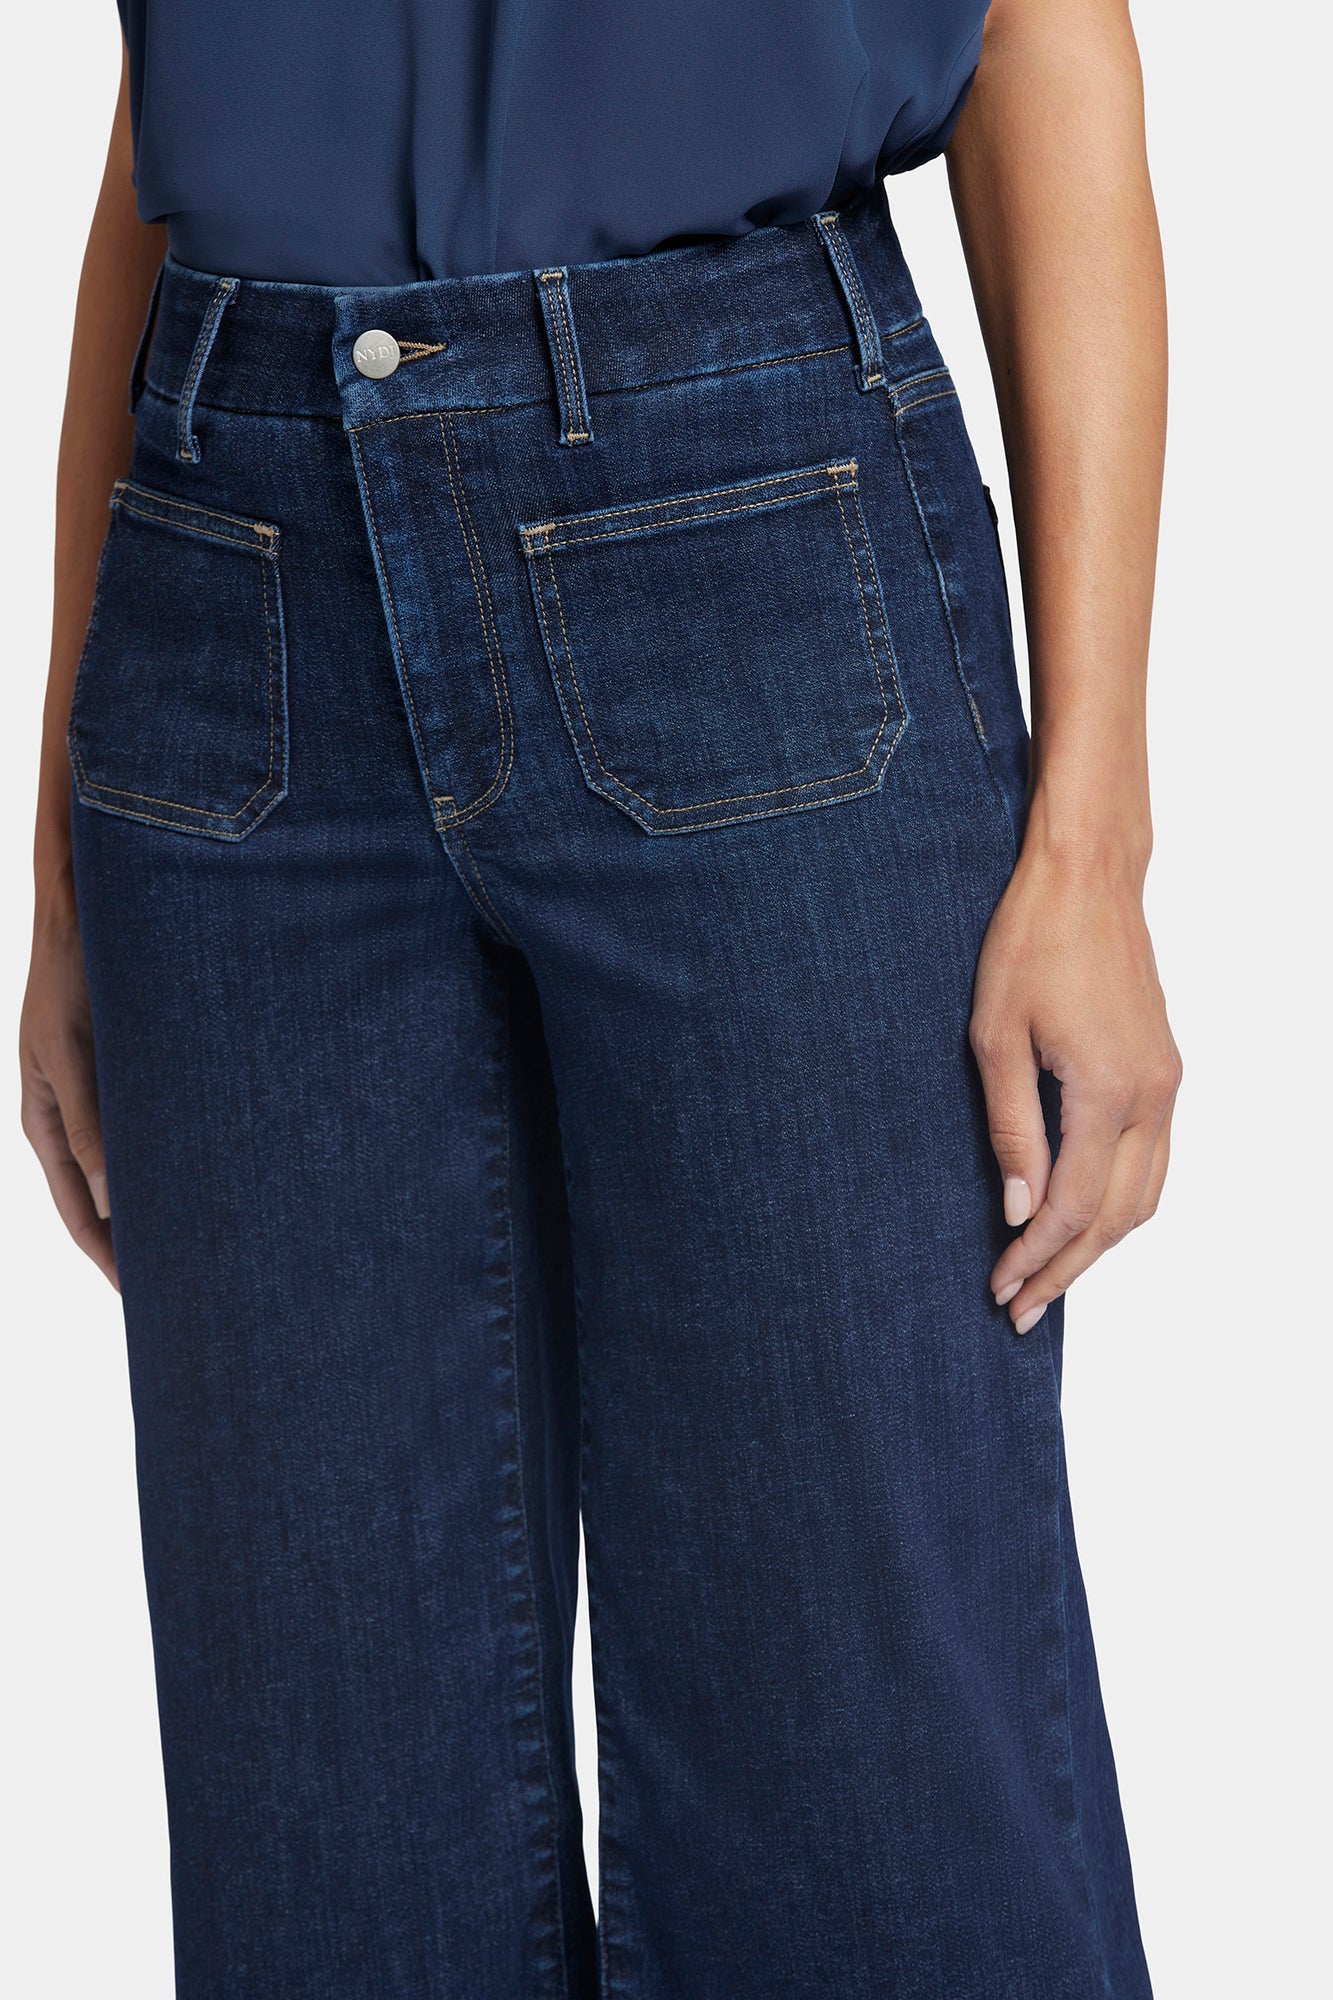 NYDJ Patchie Wide Leg Capri Jeans In Petite With Frayed Hems - Sublime